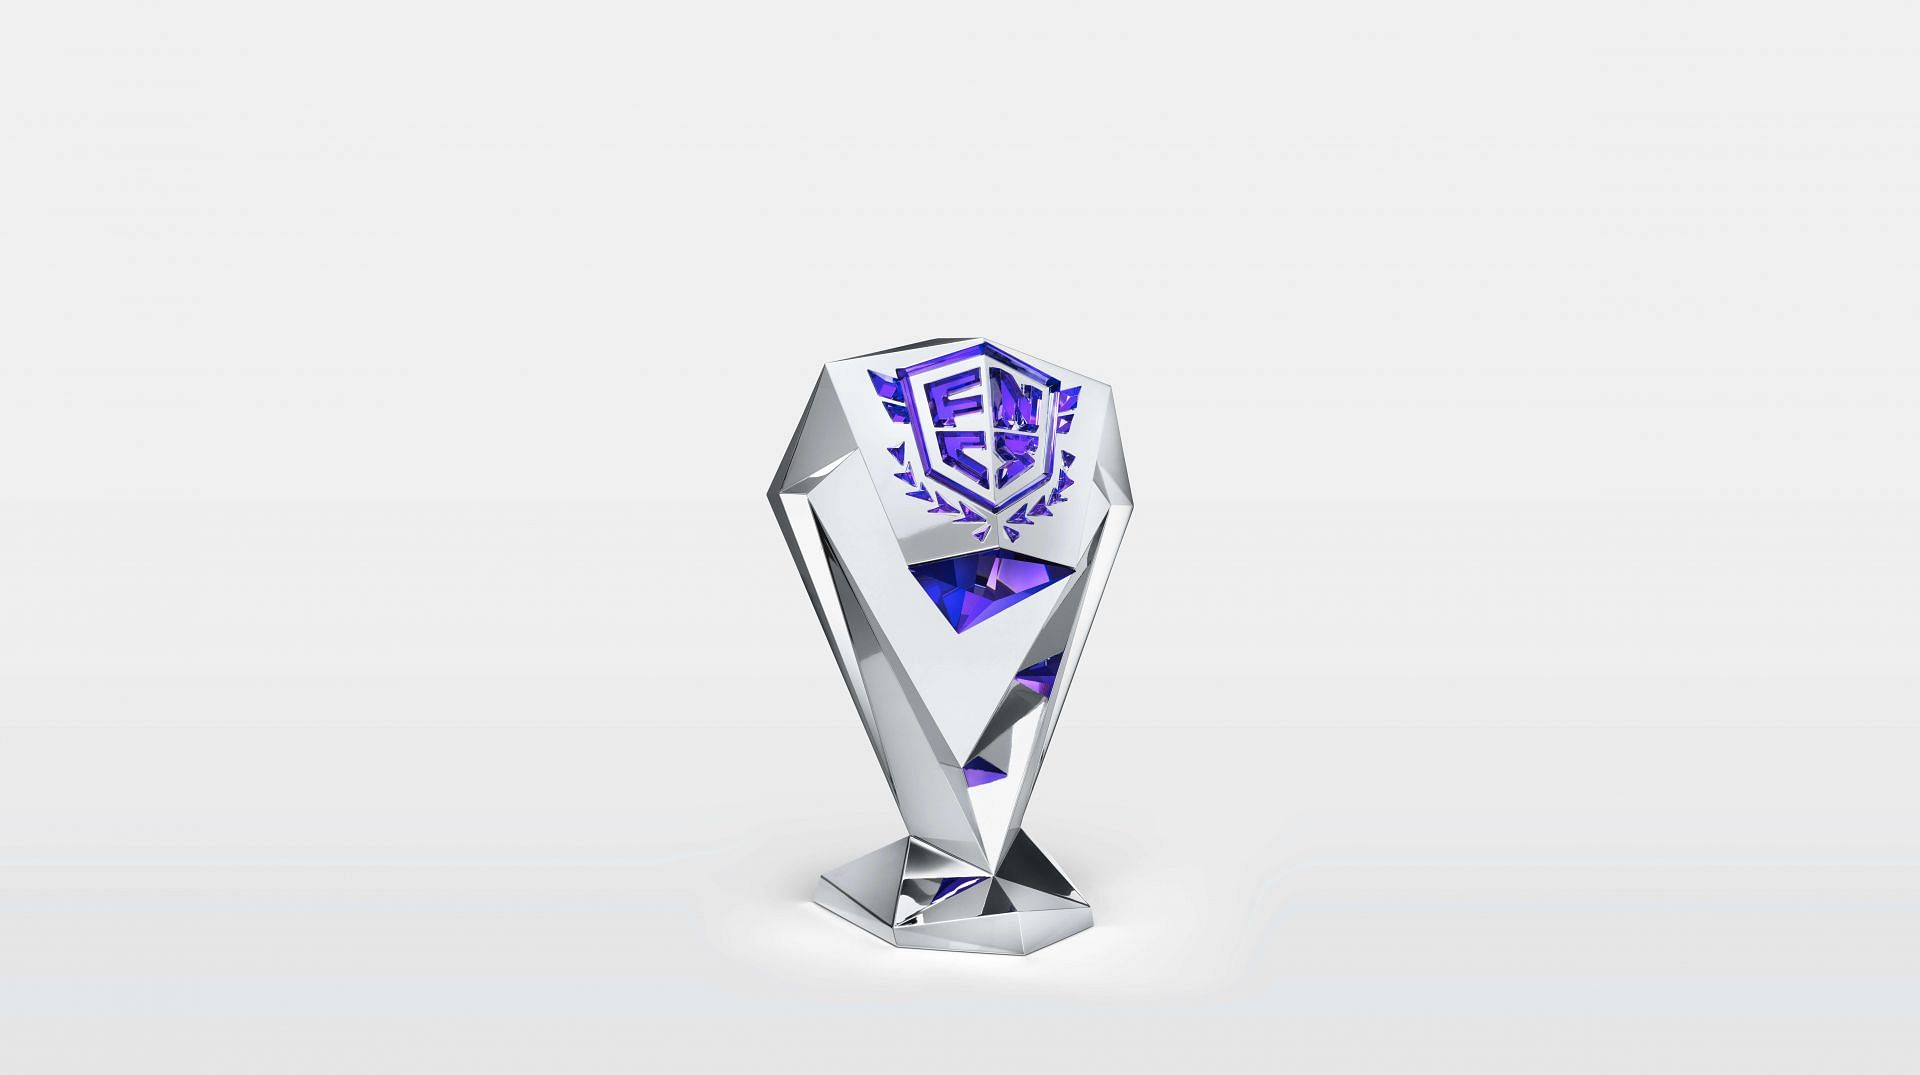 This beautiful Swarovski trophy will be given to FNCS Invitational 2022 winners (Image via Epic Games)